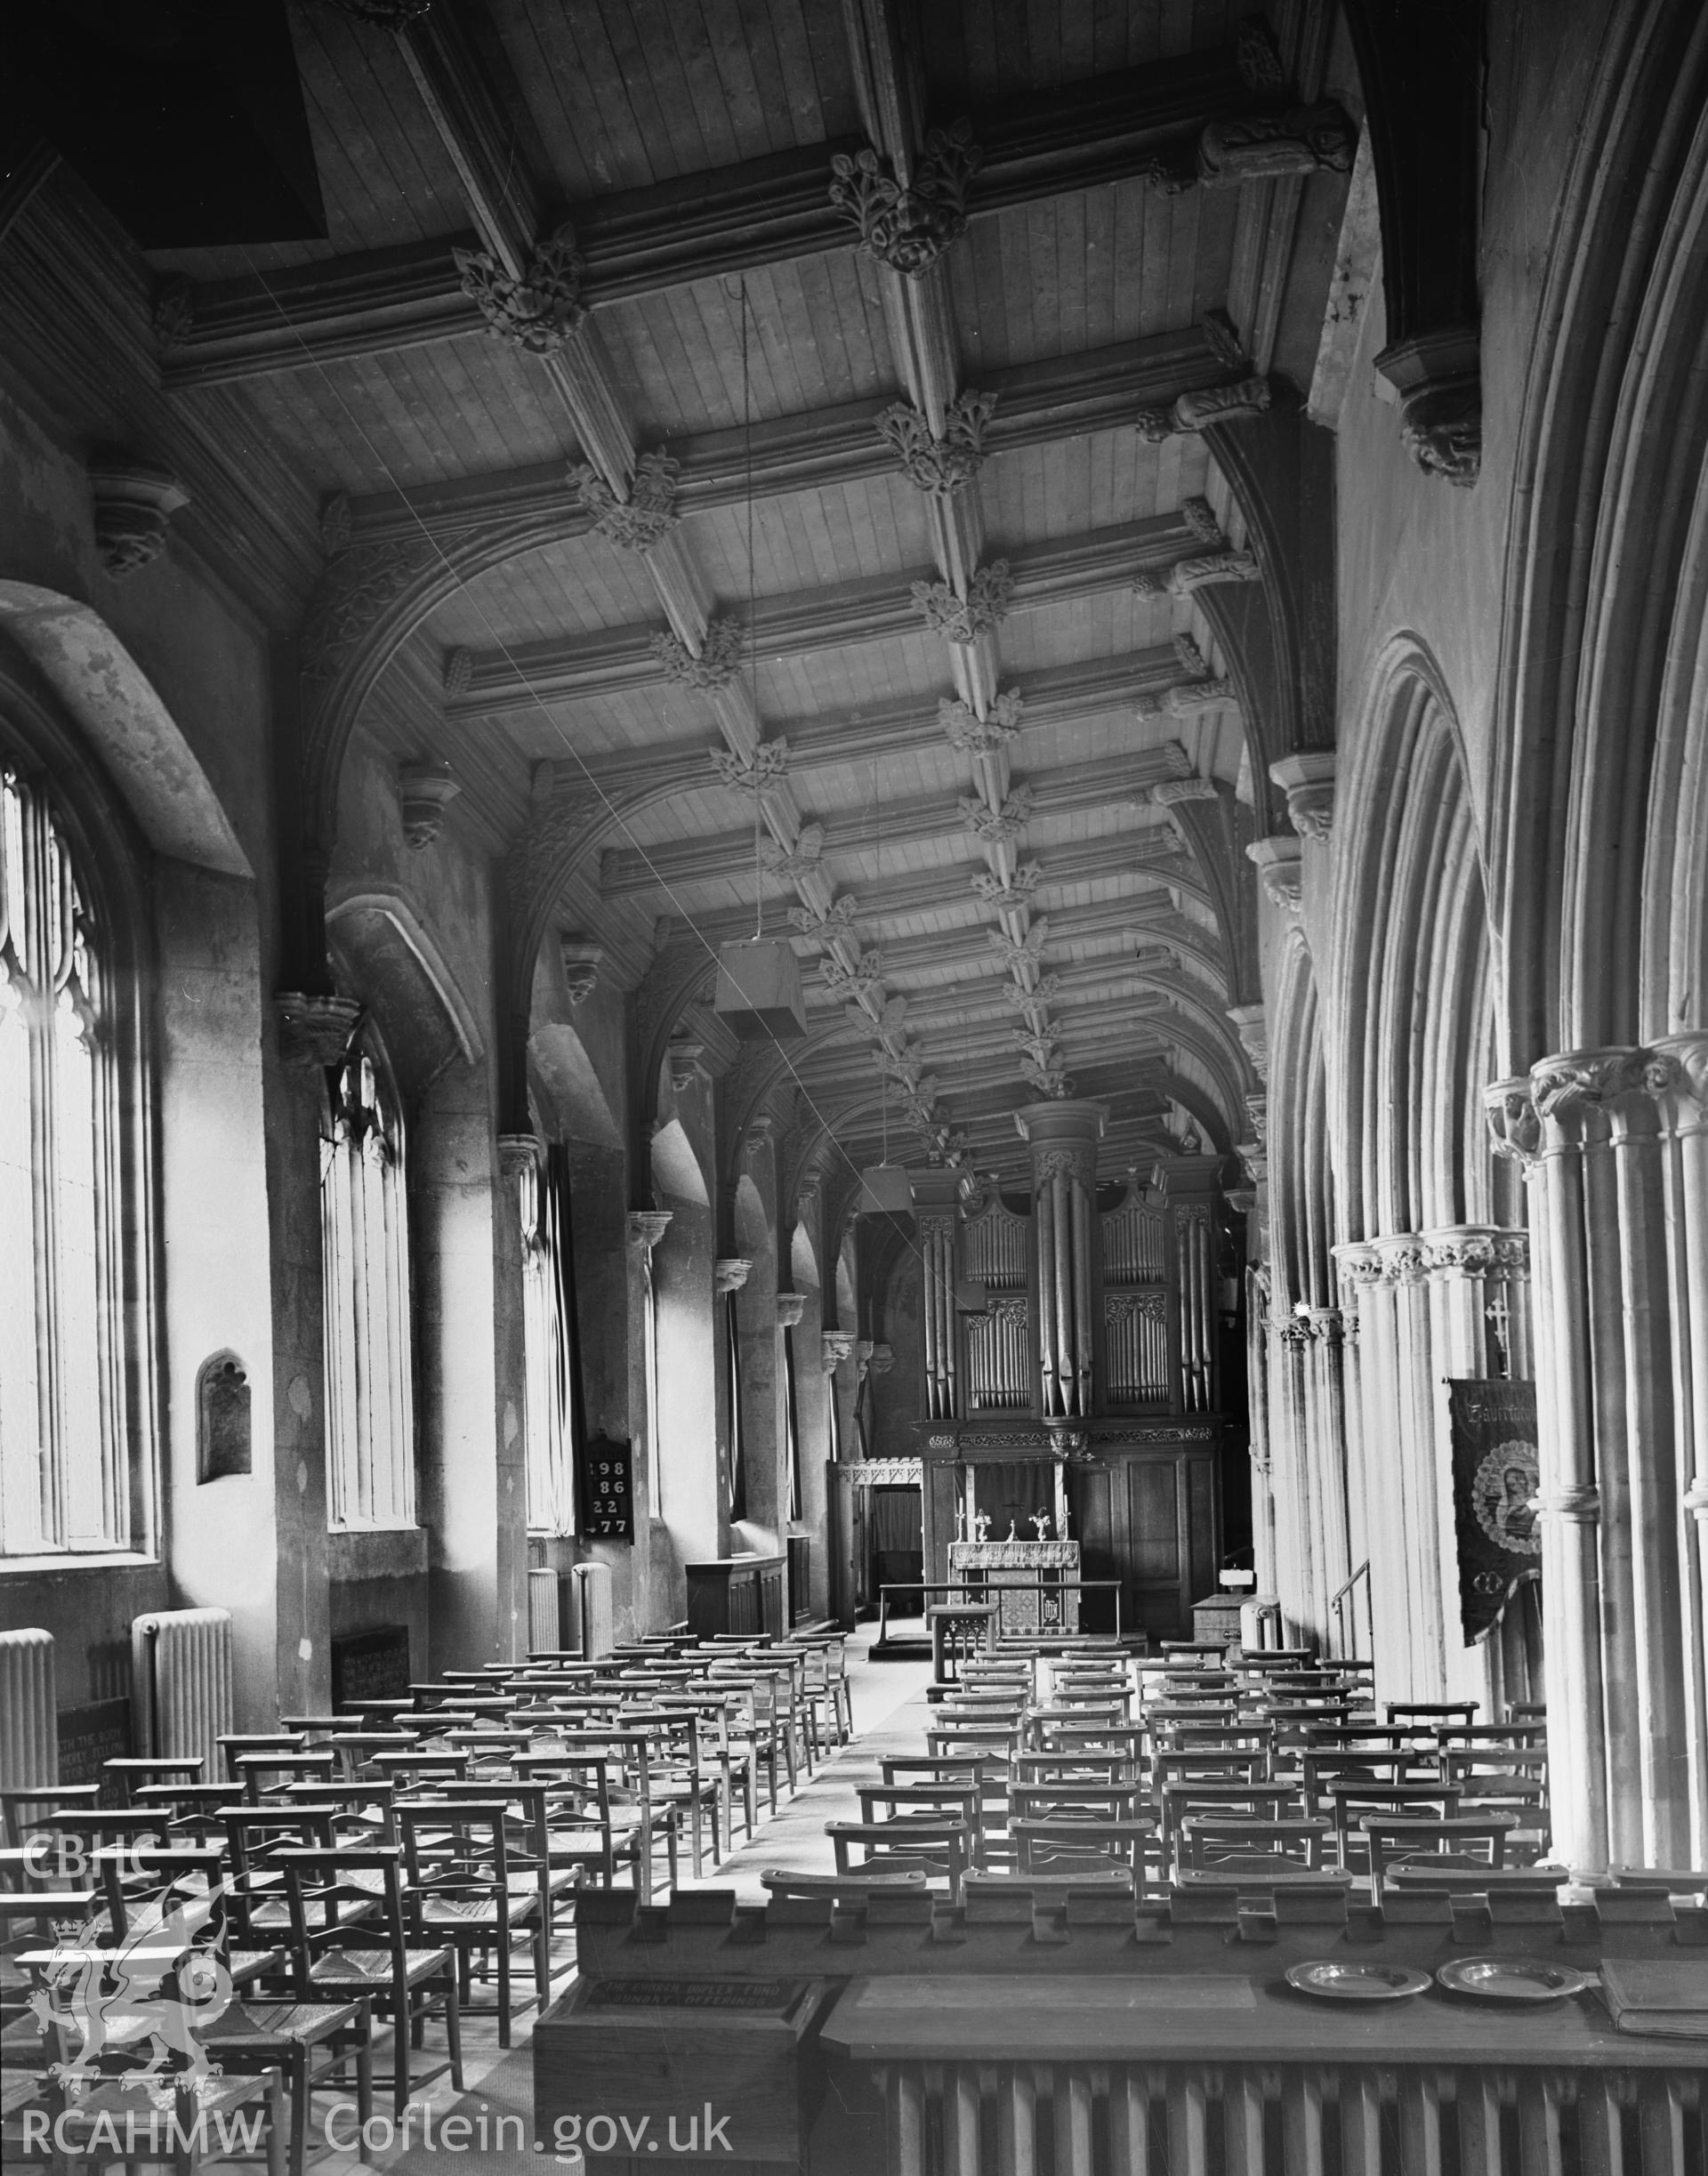 Interior view of the north aisle looking east.